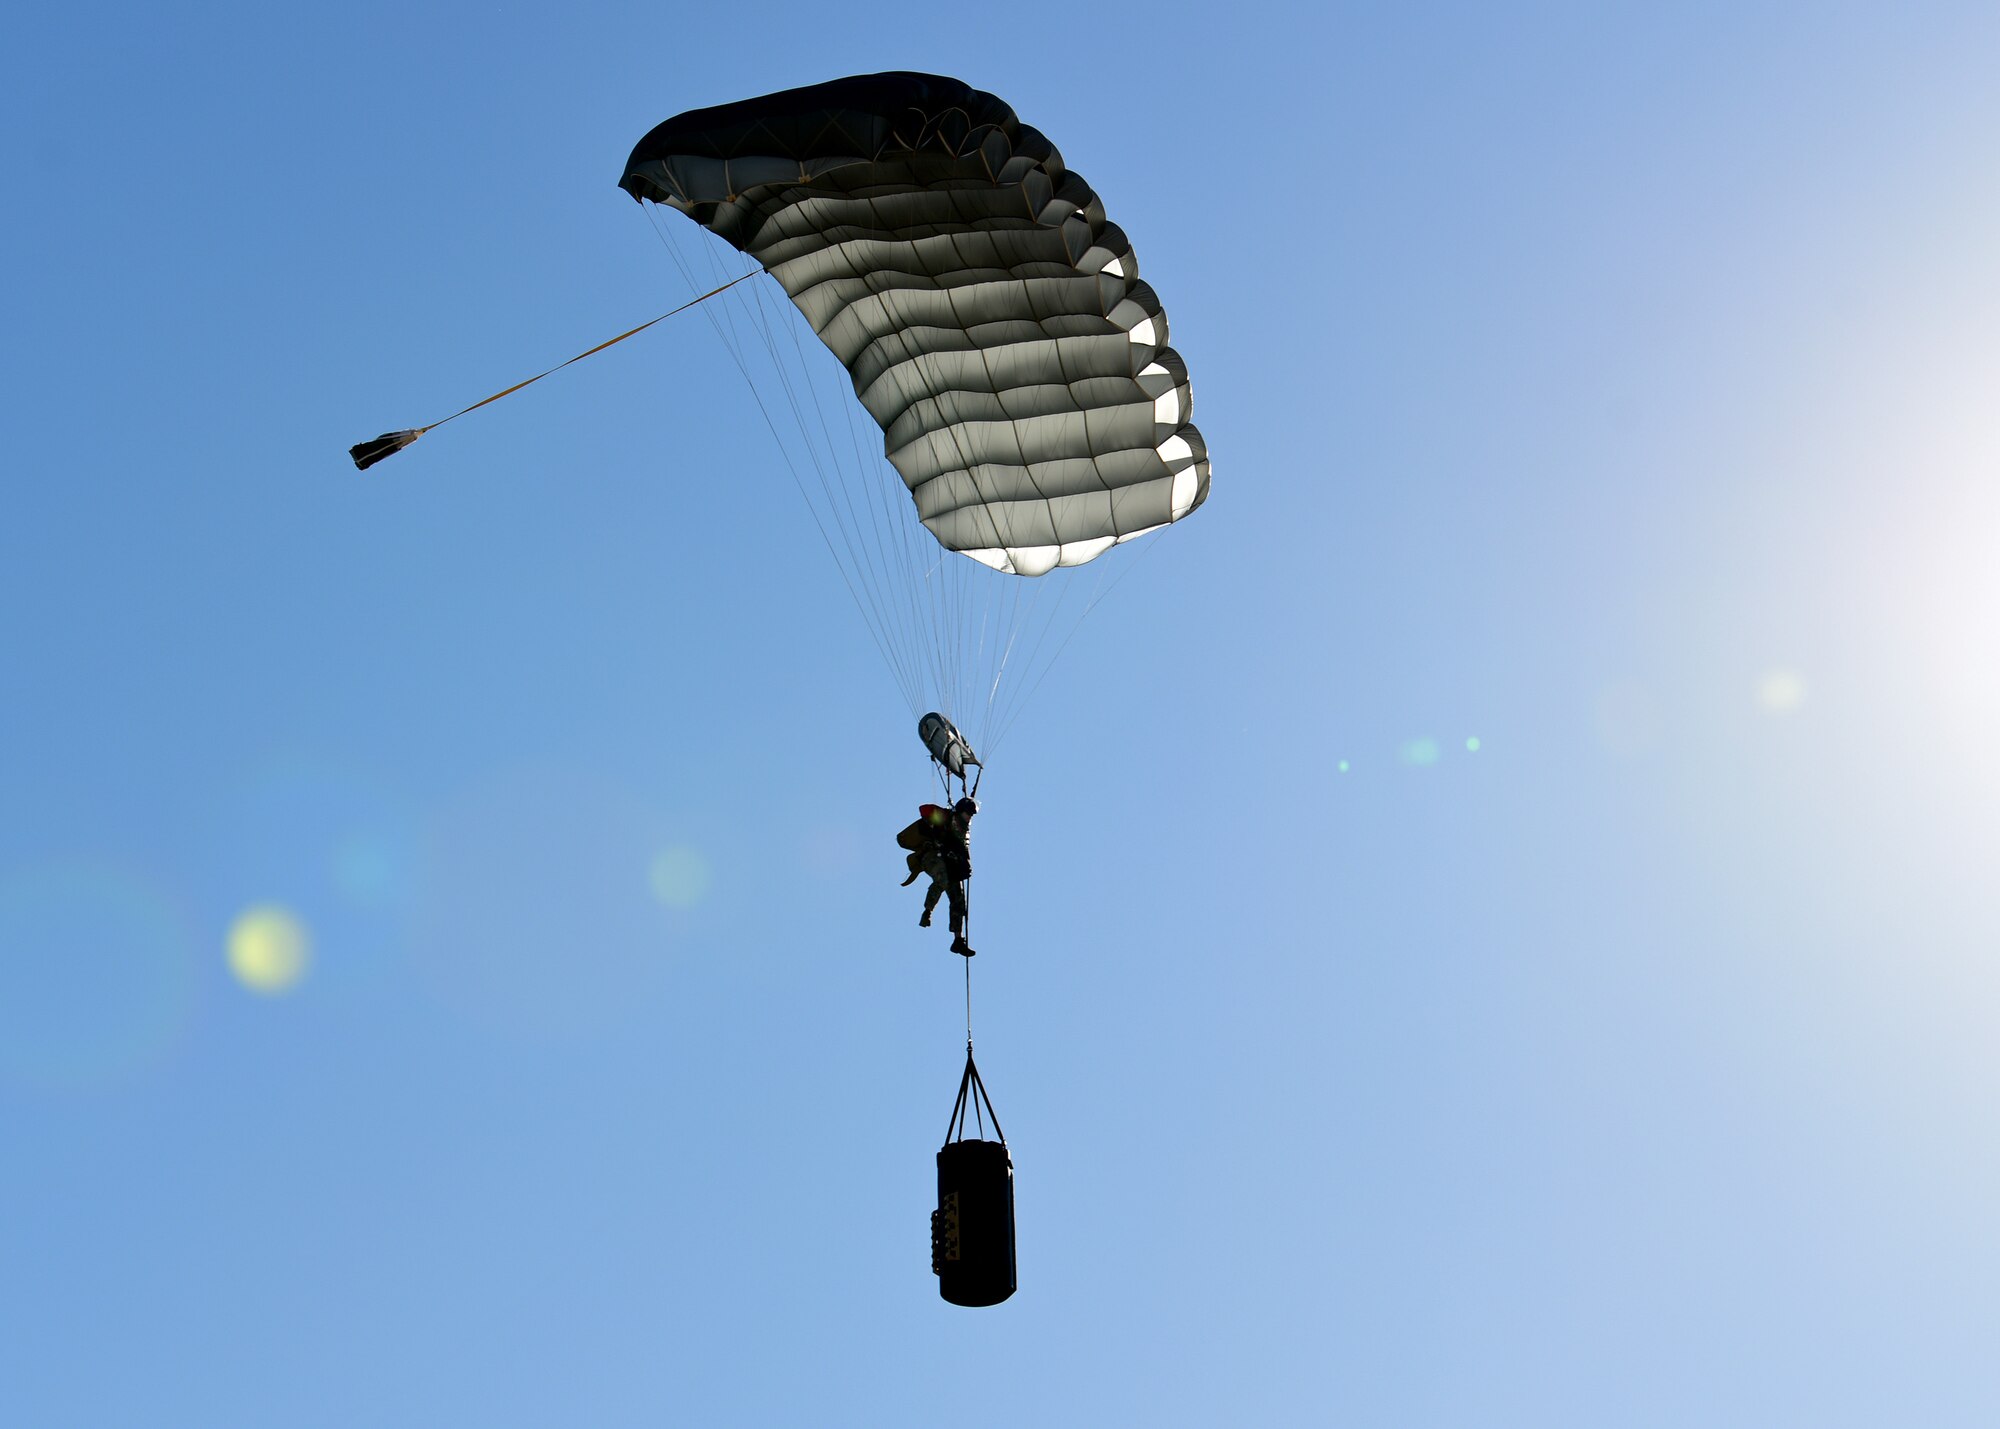 a photo of an airman parachuting with a barrel of socks